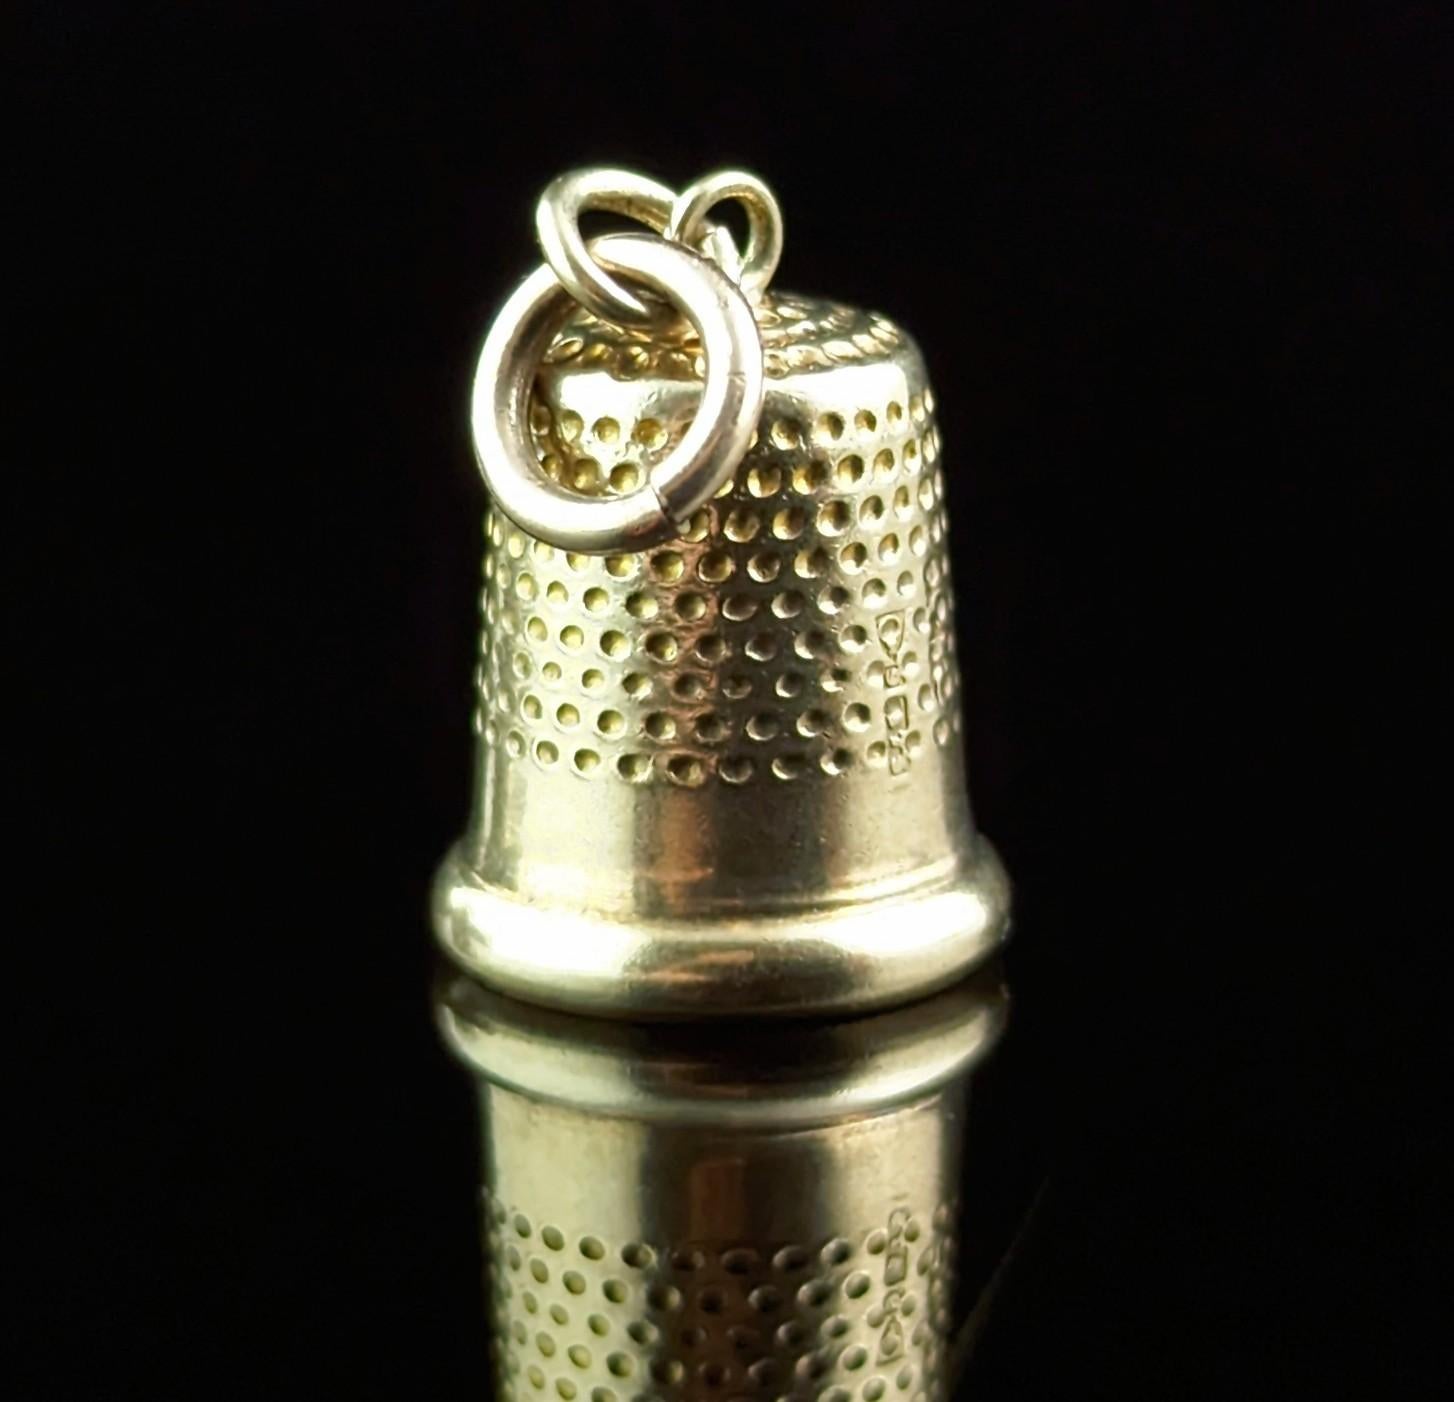 This little novelty vintage 9ct gold charm is the perfect gift for the lover of sewing or needle craft.

It is finely modelled in rich 9ct yellow gold as a little thimble, very nicely detailed.

The charm is a mid-century piece and is hallmarked to